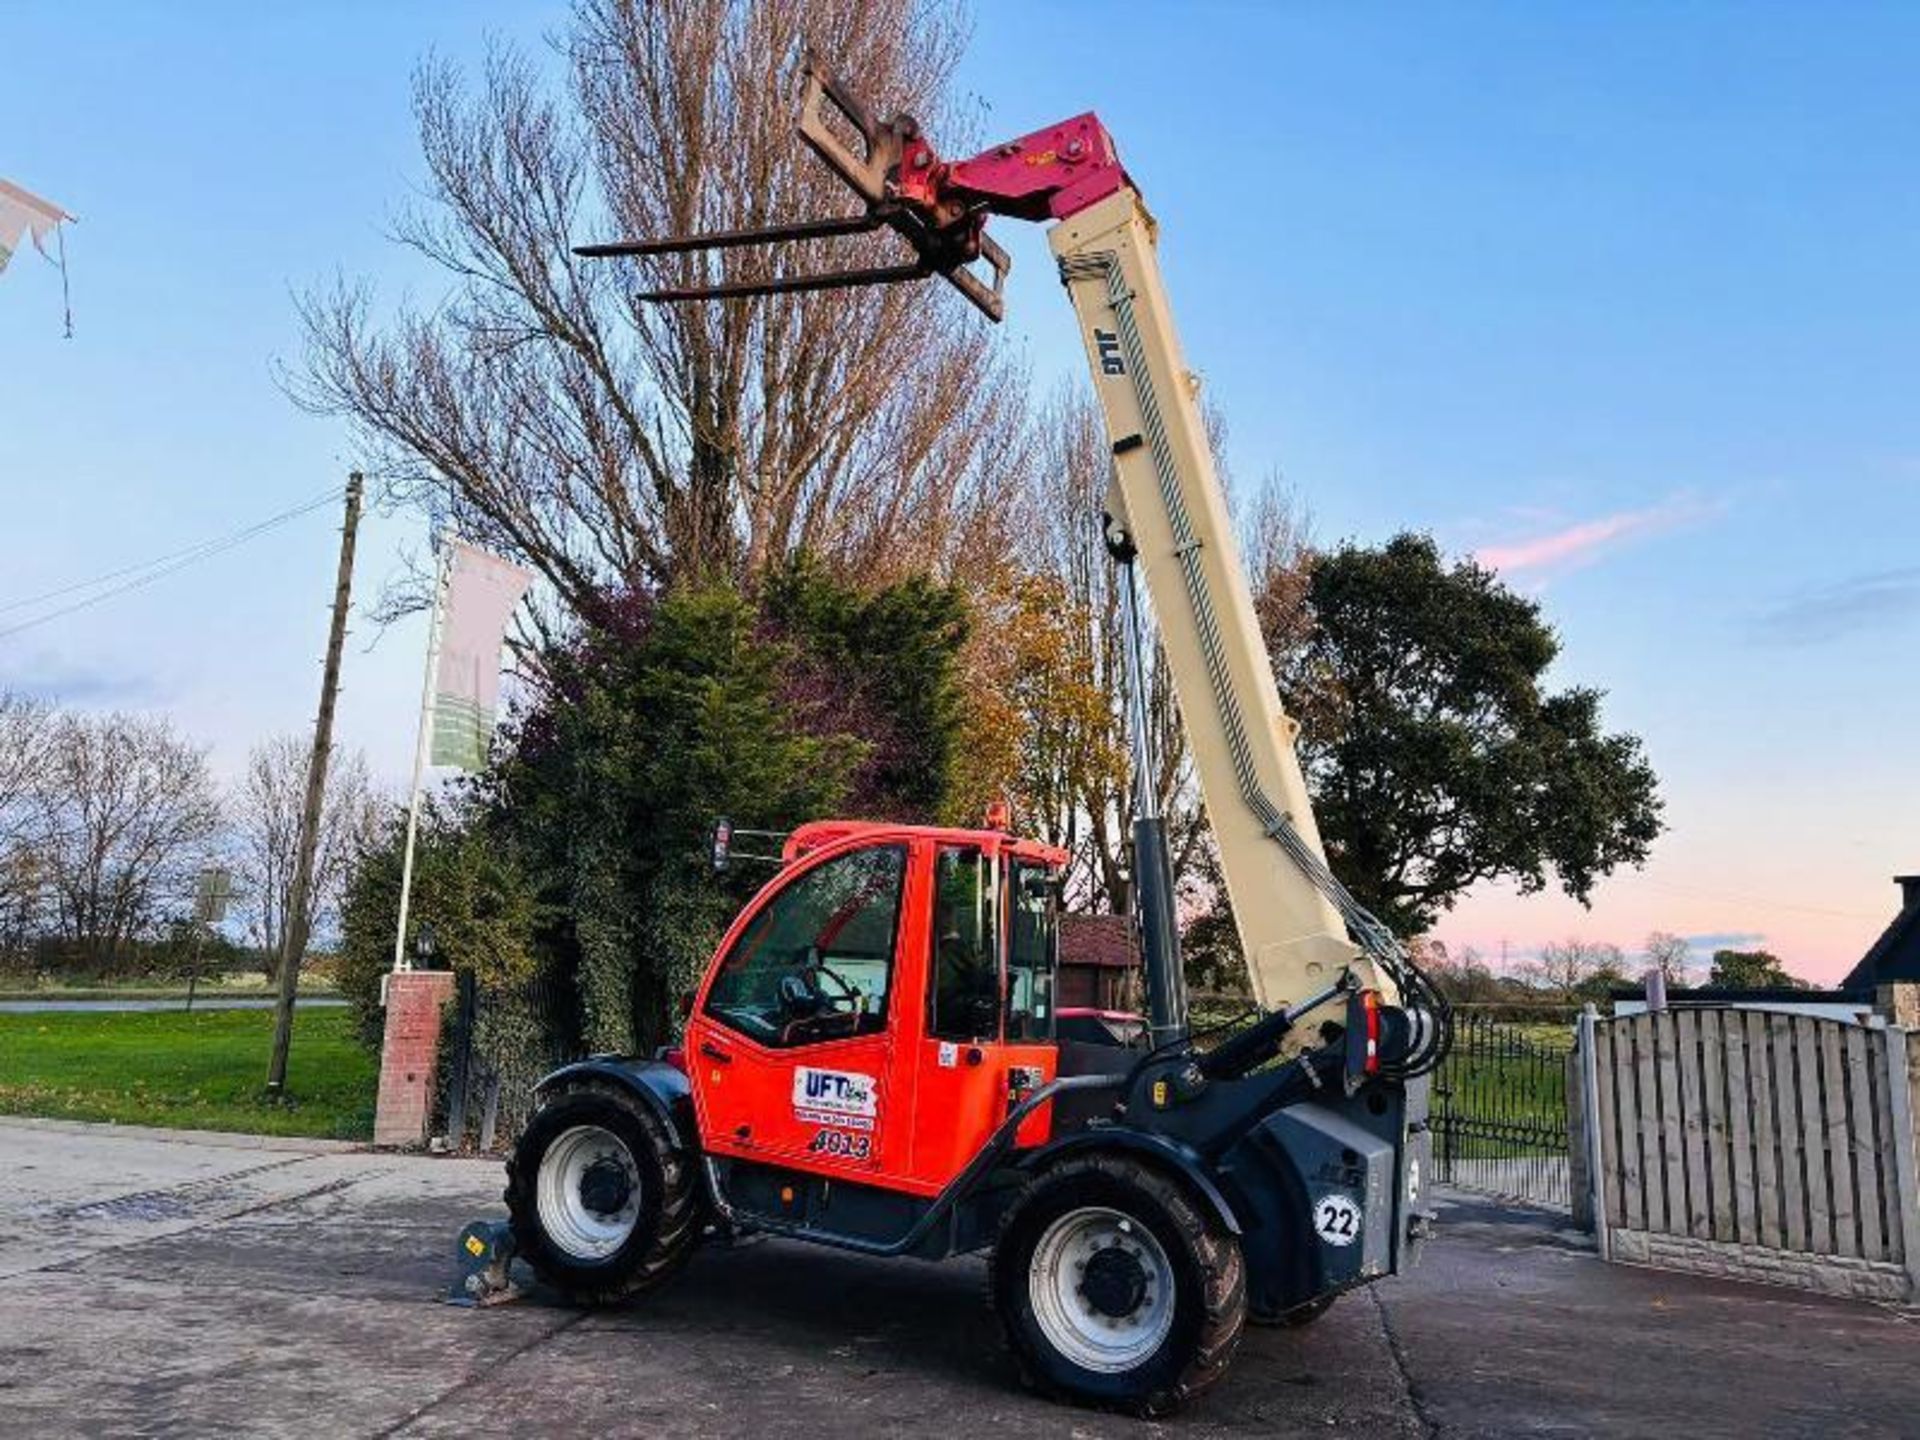 JLG 4013 4WD TELEHANDLER *YEAR 2007, 6881 HOURS* C/W LONG PALLET TINES - Image 2 of 20